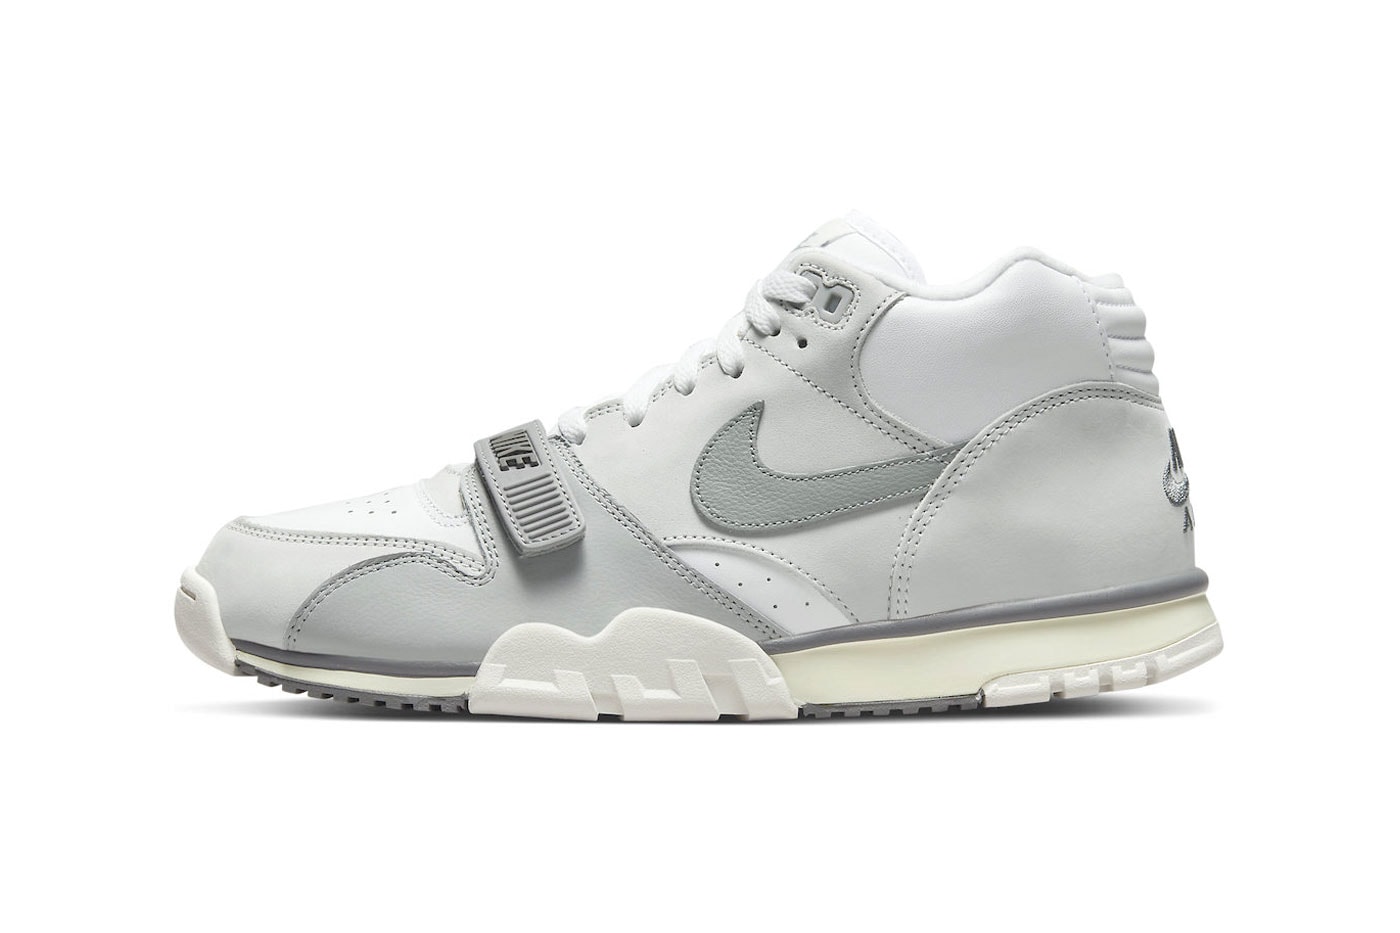 Take an Official Look at the Nike Air Trainer 1 "Photon Dust" DM0521-001 light smoke grey smoke grey 